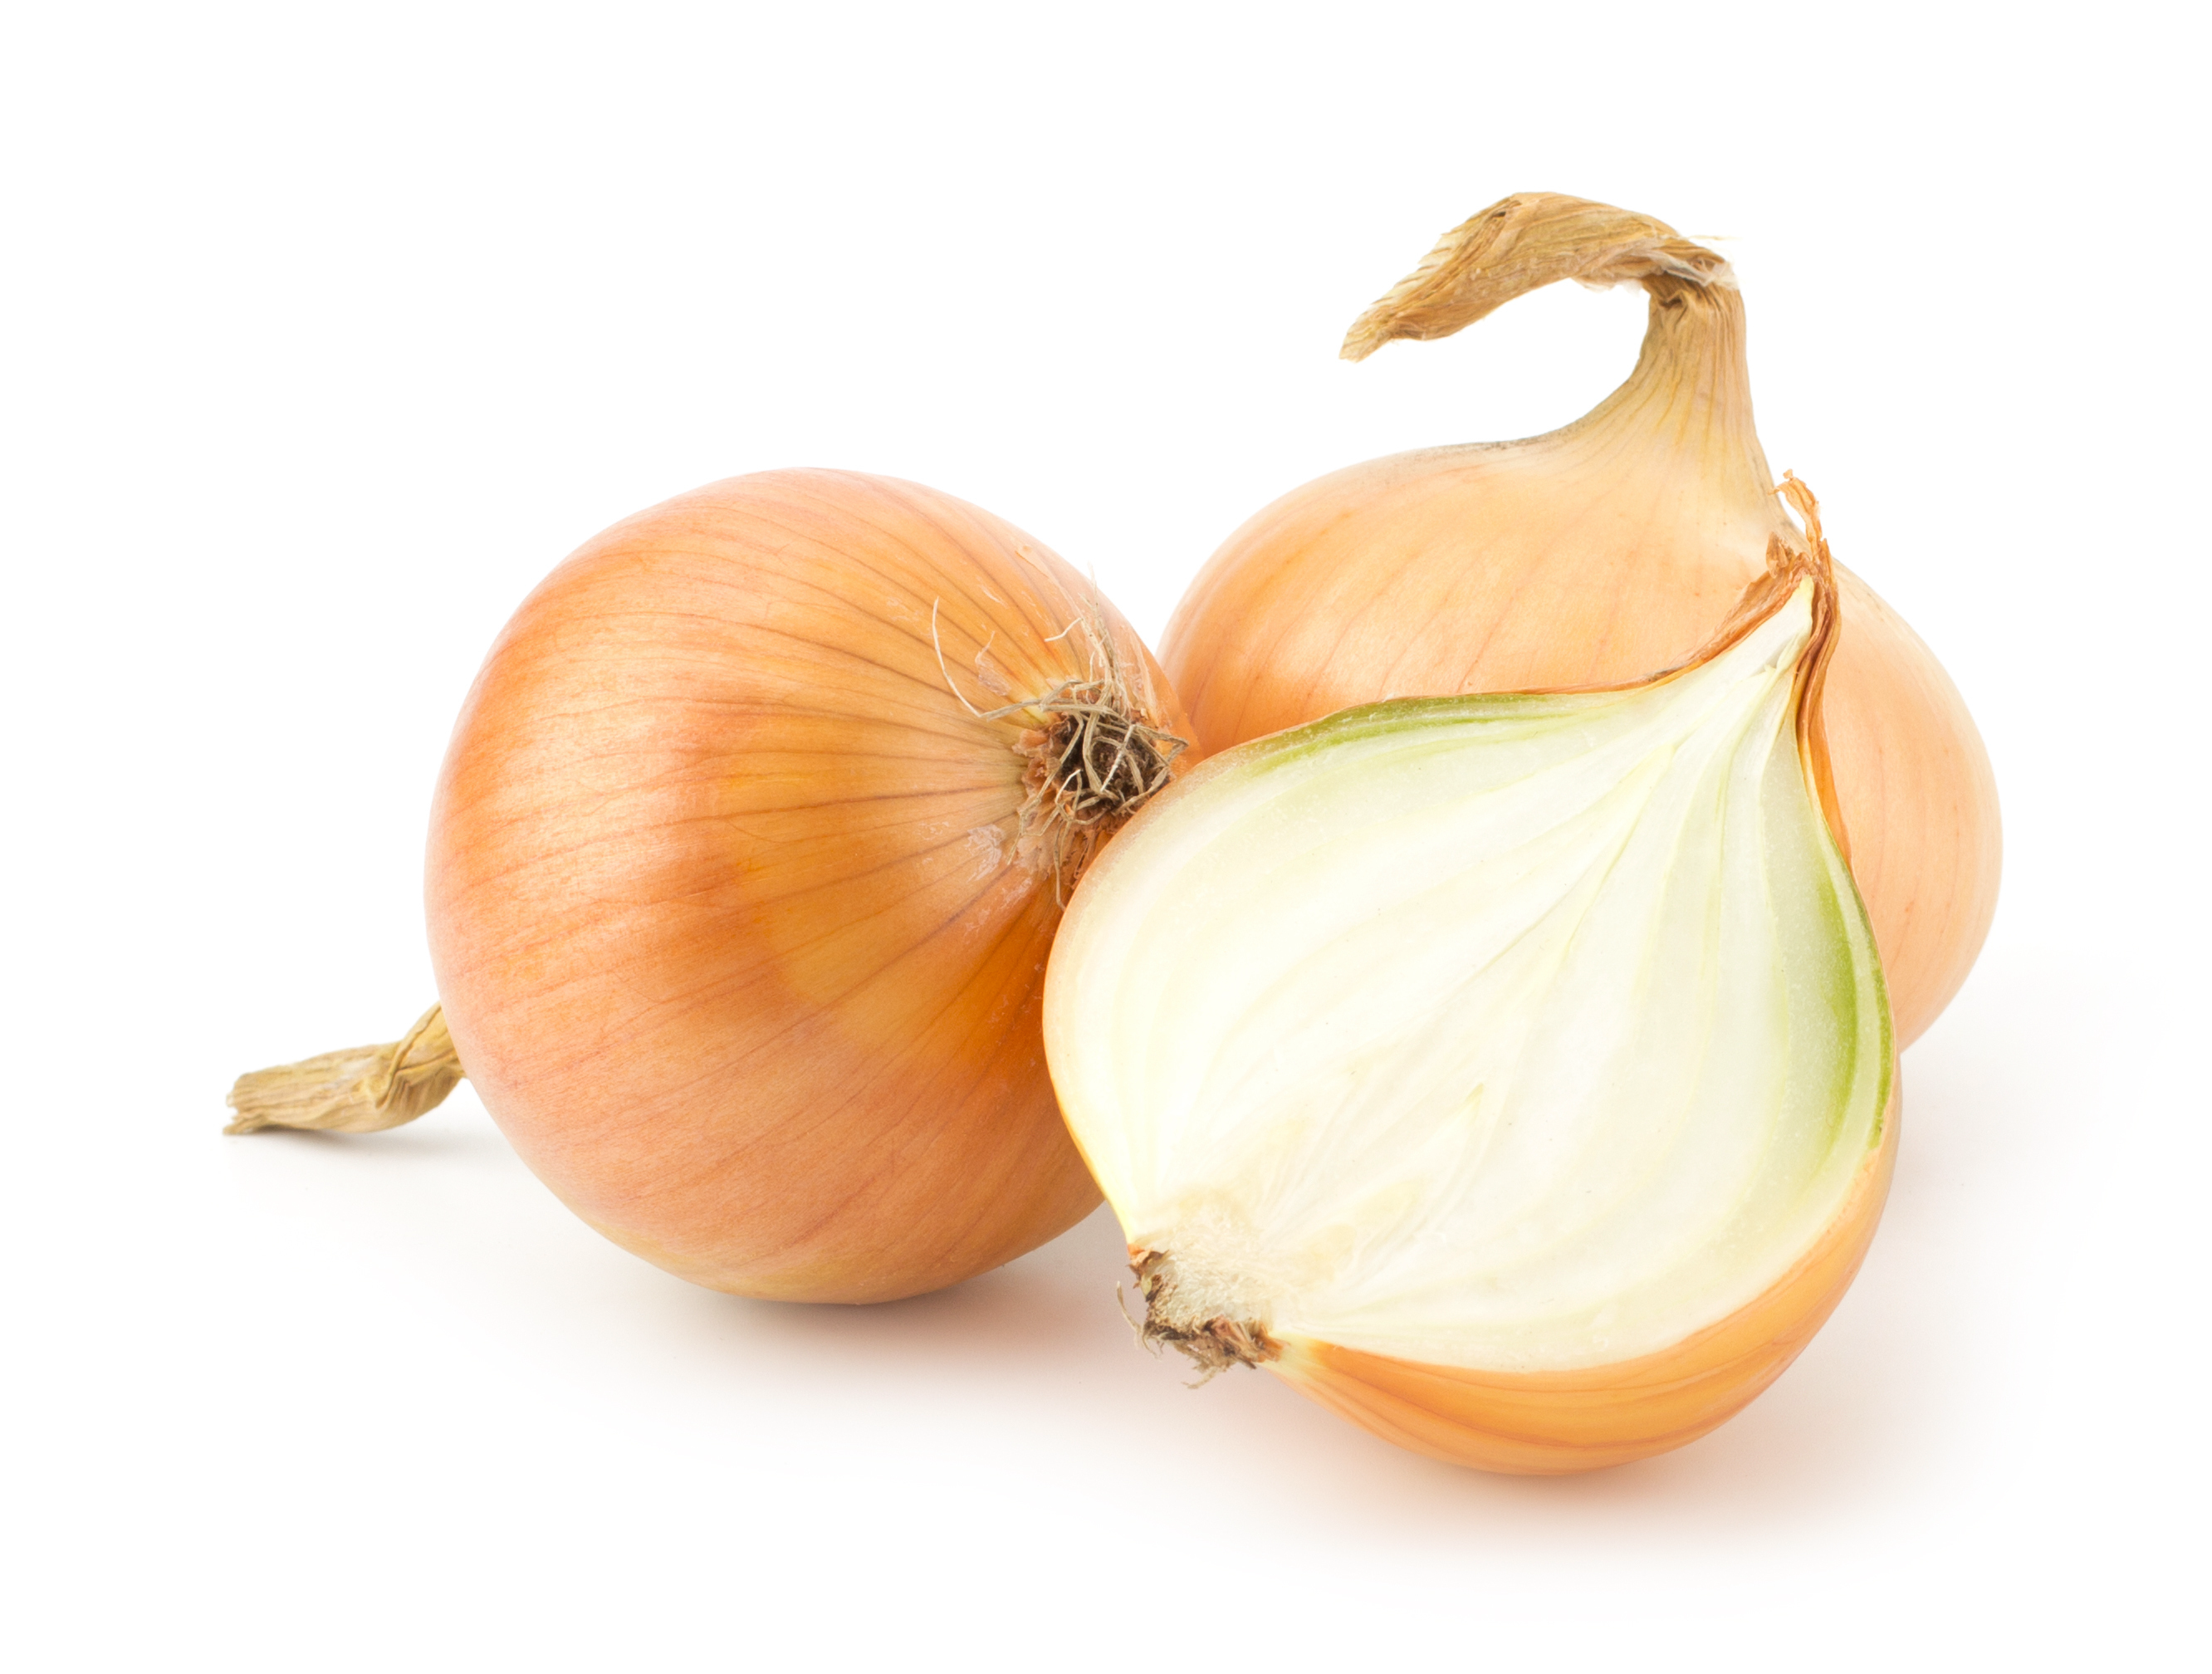 Yellow Onion Ca900-1000g price per package Netherlands